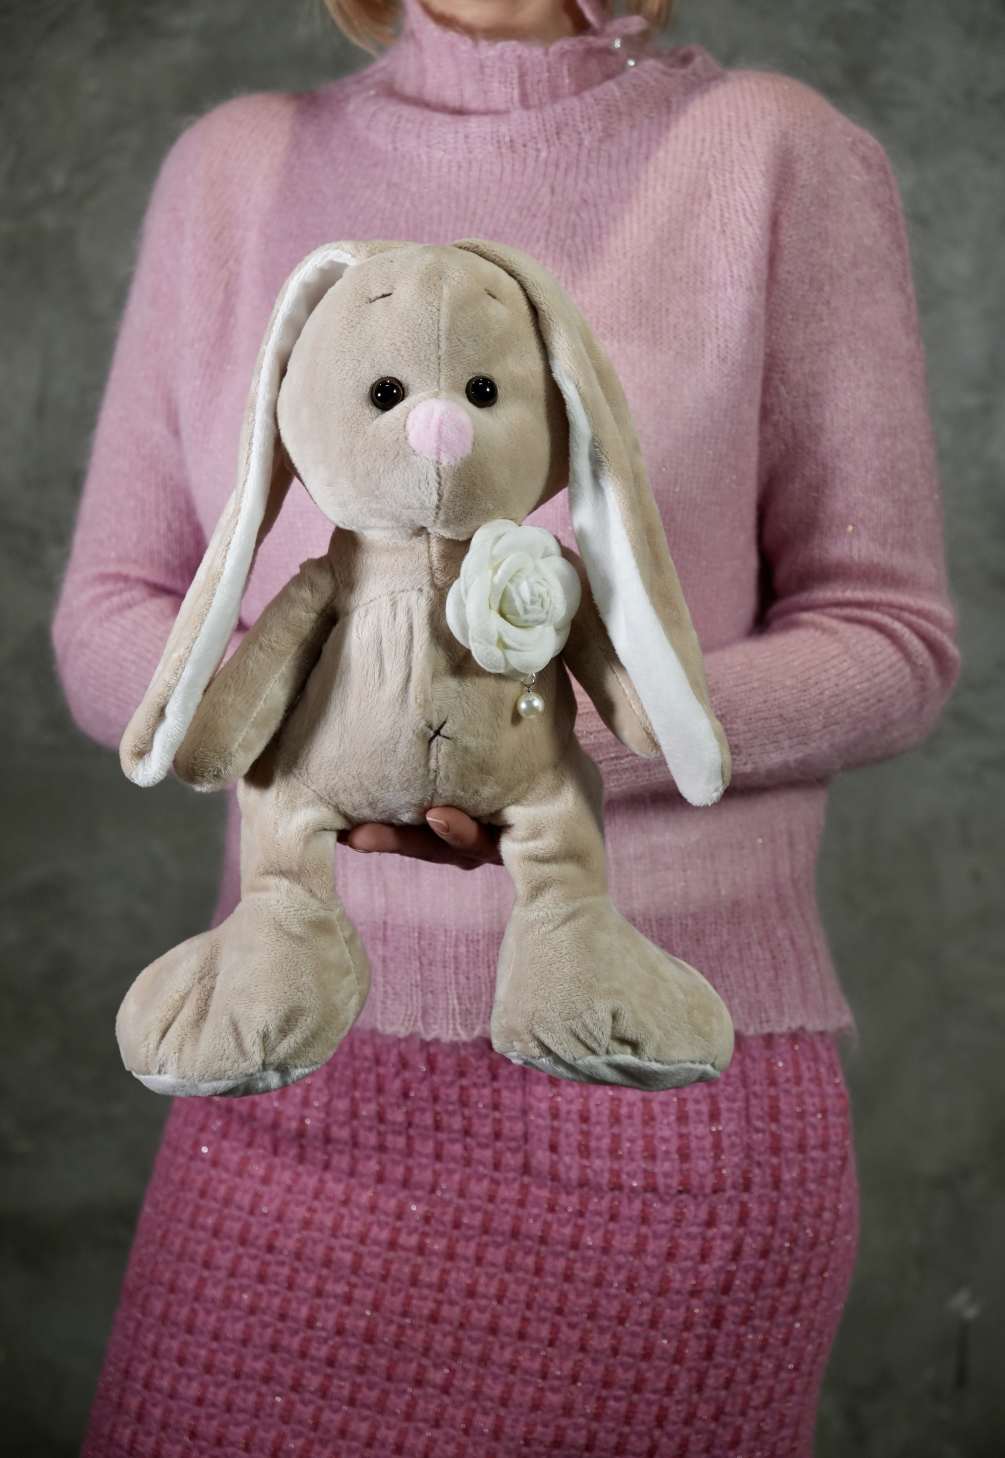 The Fluffy Bunny Buddy is a soft and cozy toy that will